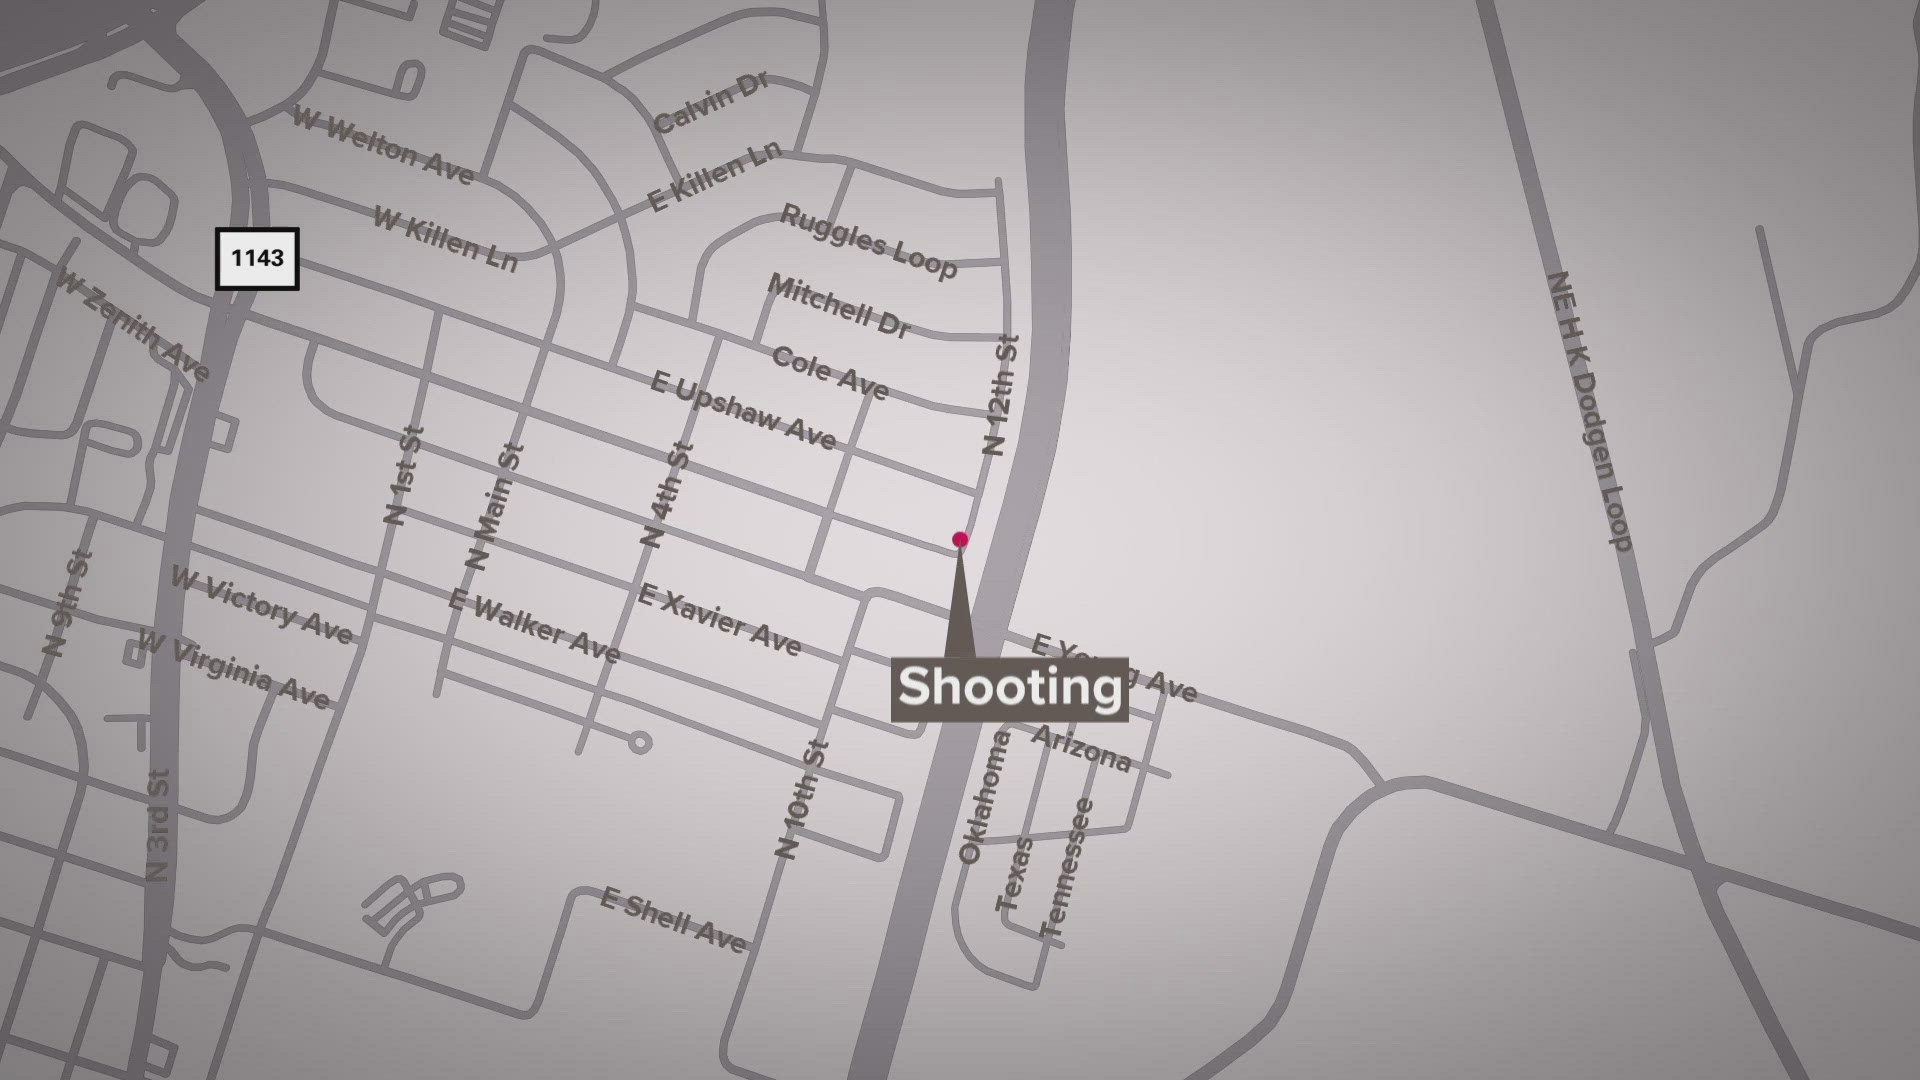 The shooting allegedly took place in the 2600 block of N 12th St.